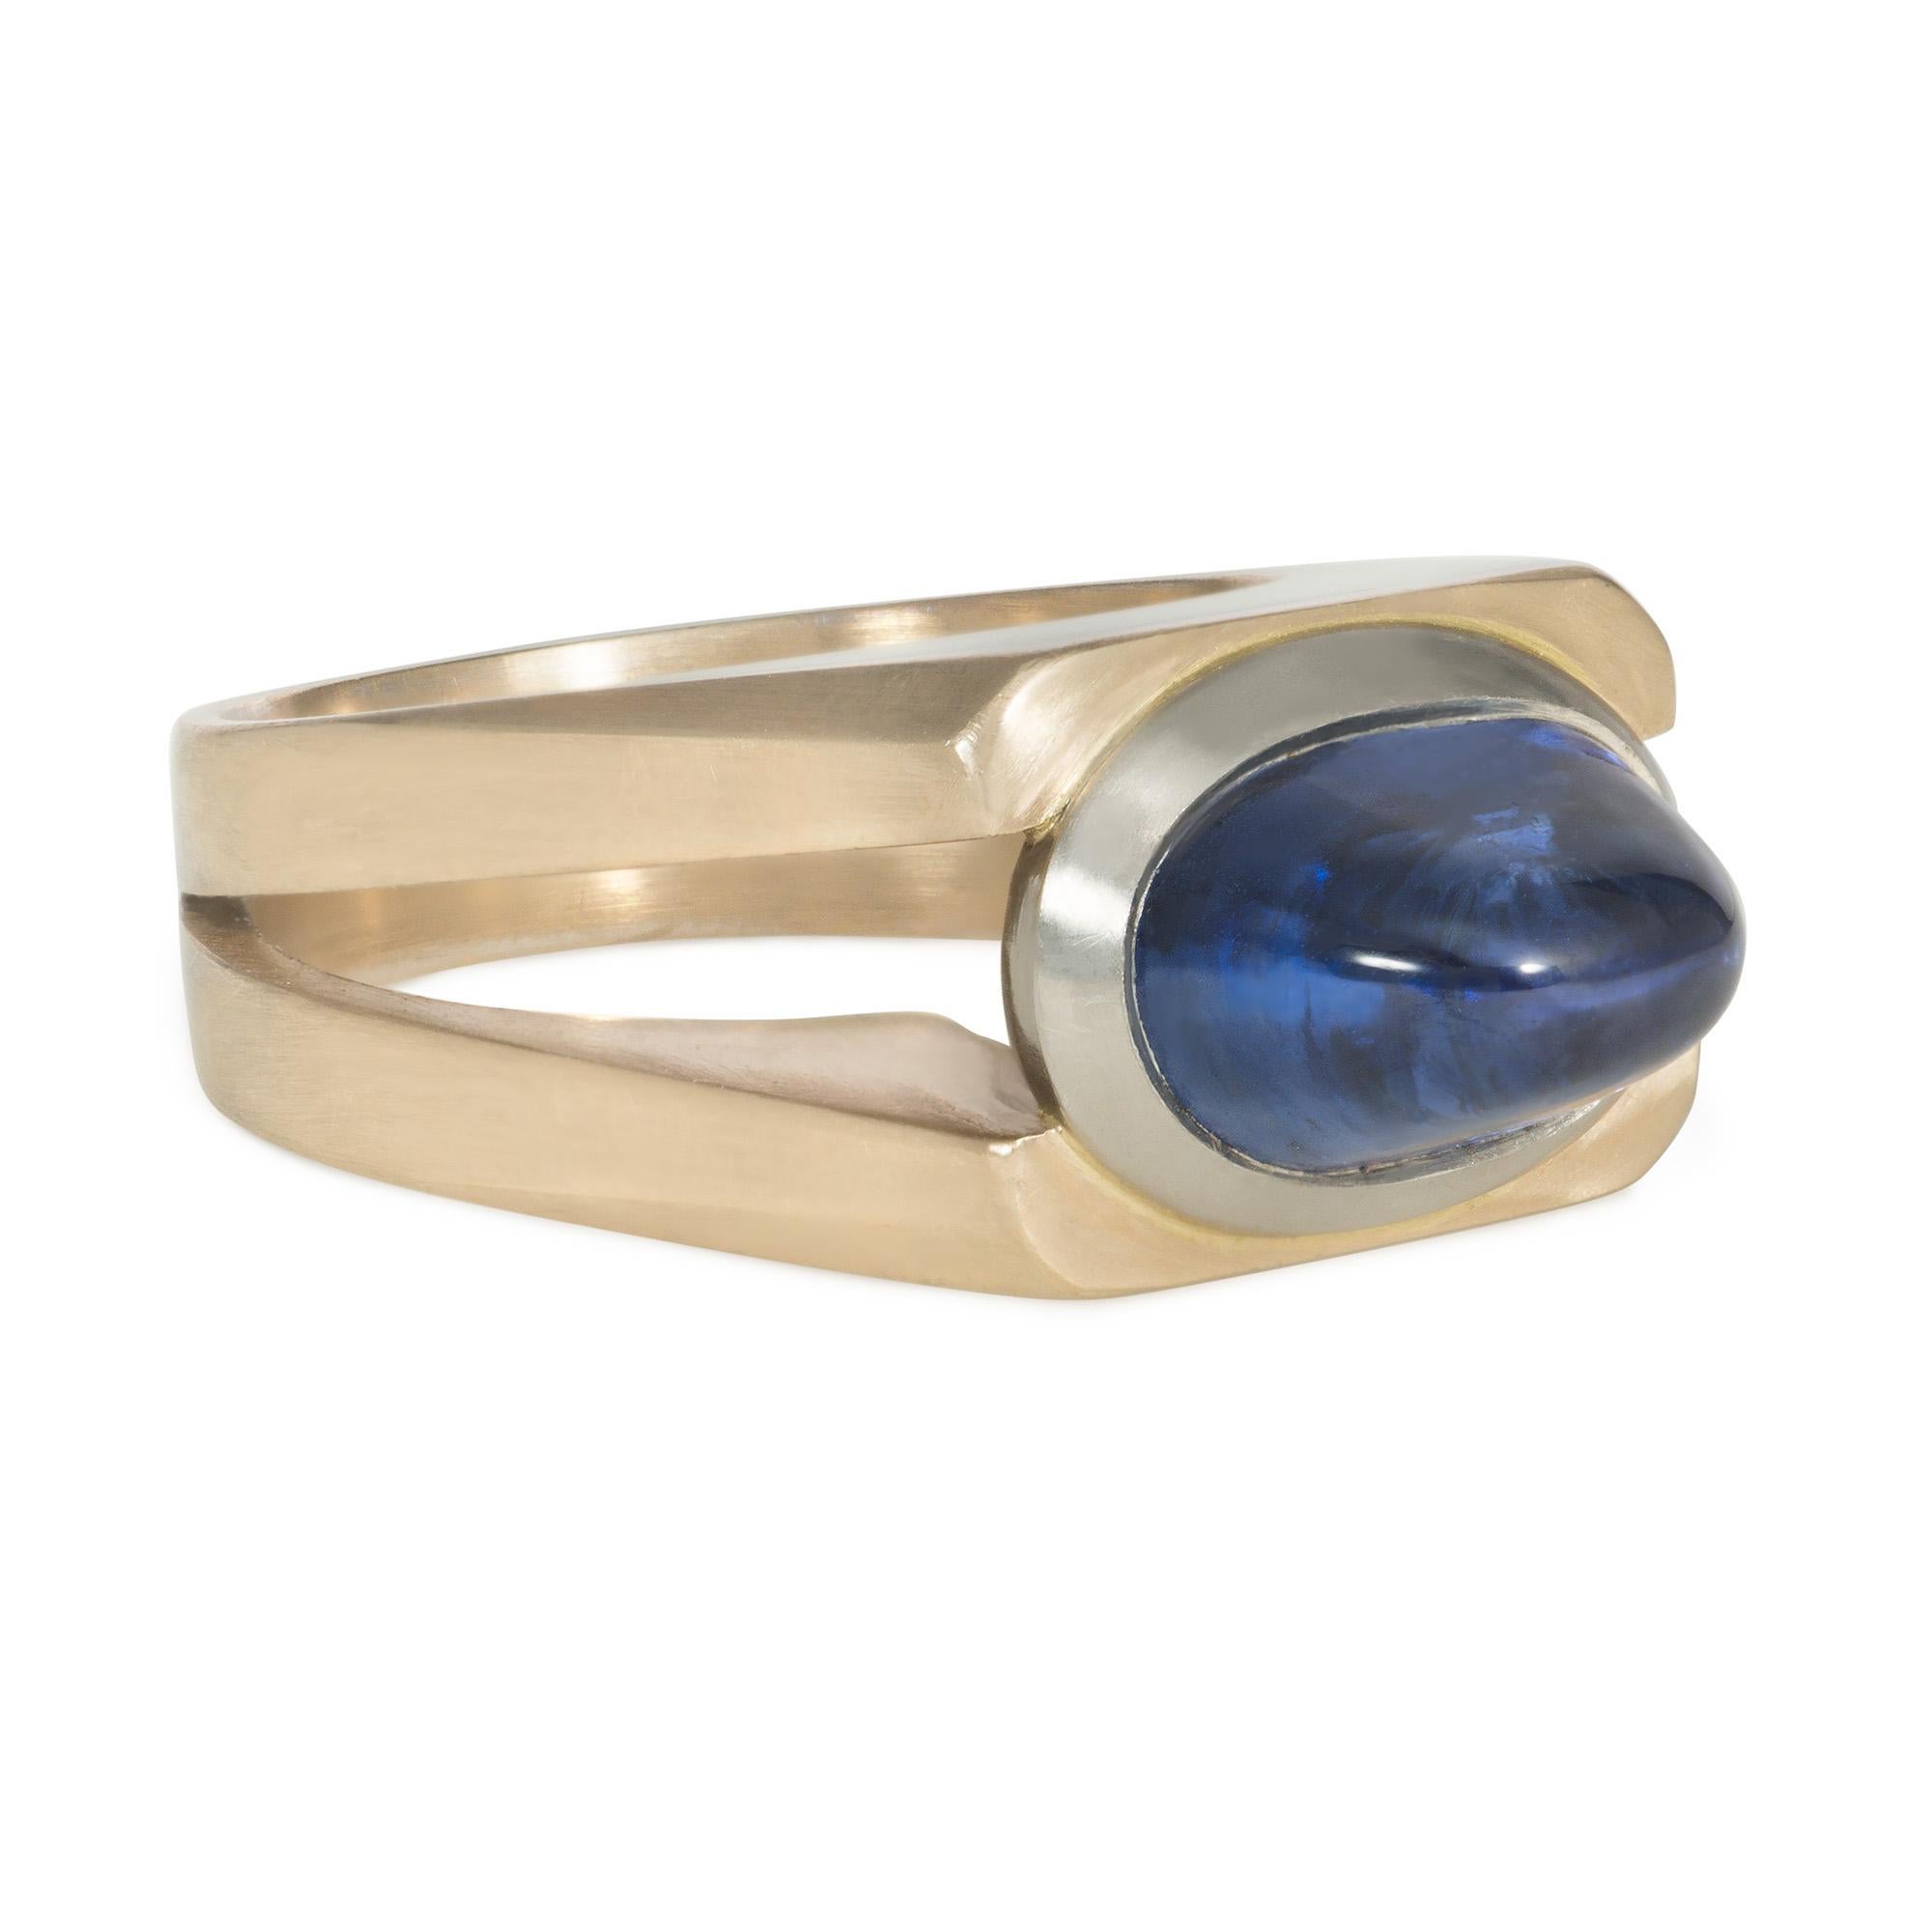 An estate sapphire and two-color gold ring of streamlined industrial design, centered by a sugarloaf cabochon sapphire in a white-gold bezel, and set in a brushed yellow-gold mount with tapering open shoulders, in 18k.  Atw sapphire 5.57 cts. 